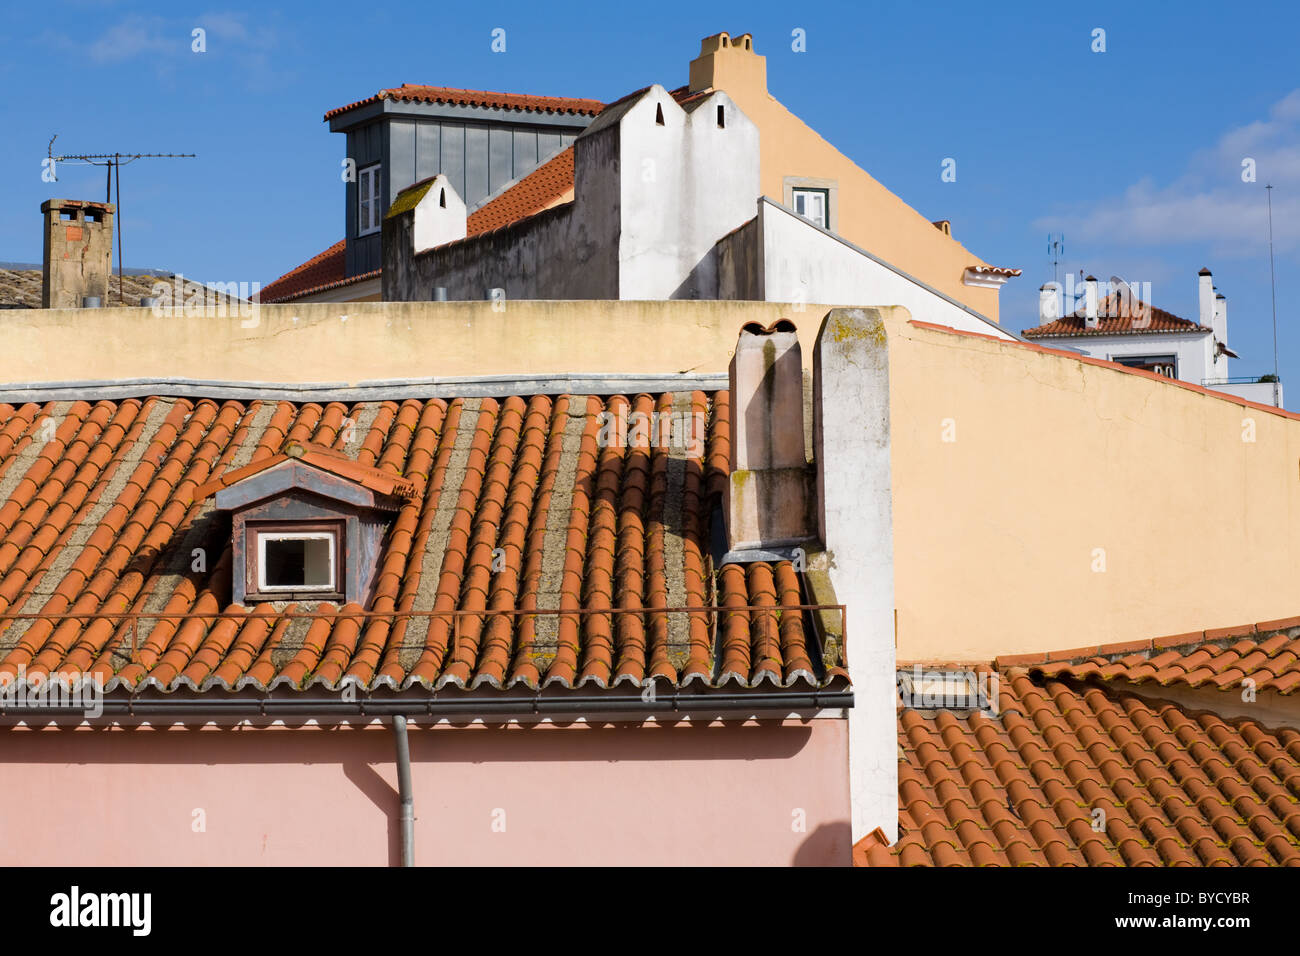 Terra cotta roofs and pastel walls and chimneys, Alfama, Lisbon, Portugal Stock Photo